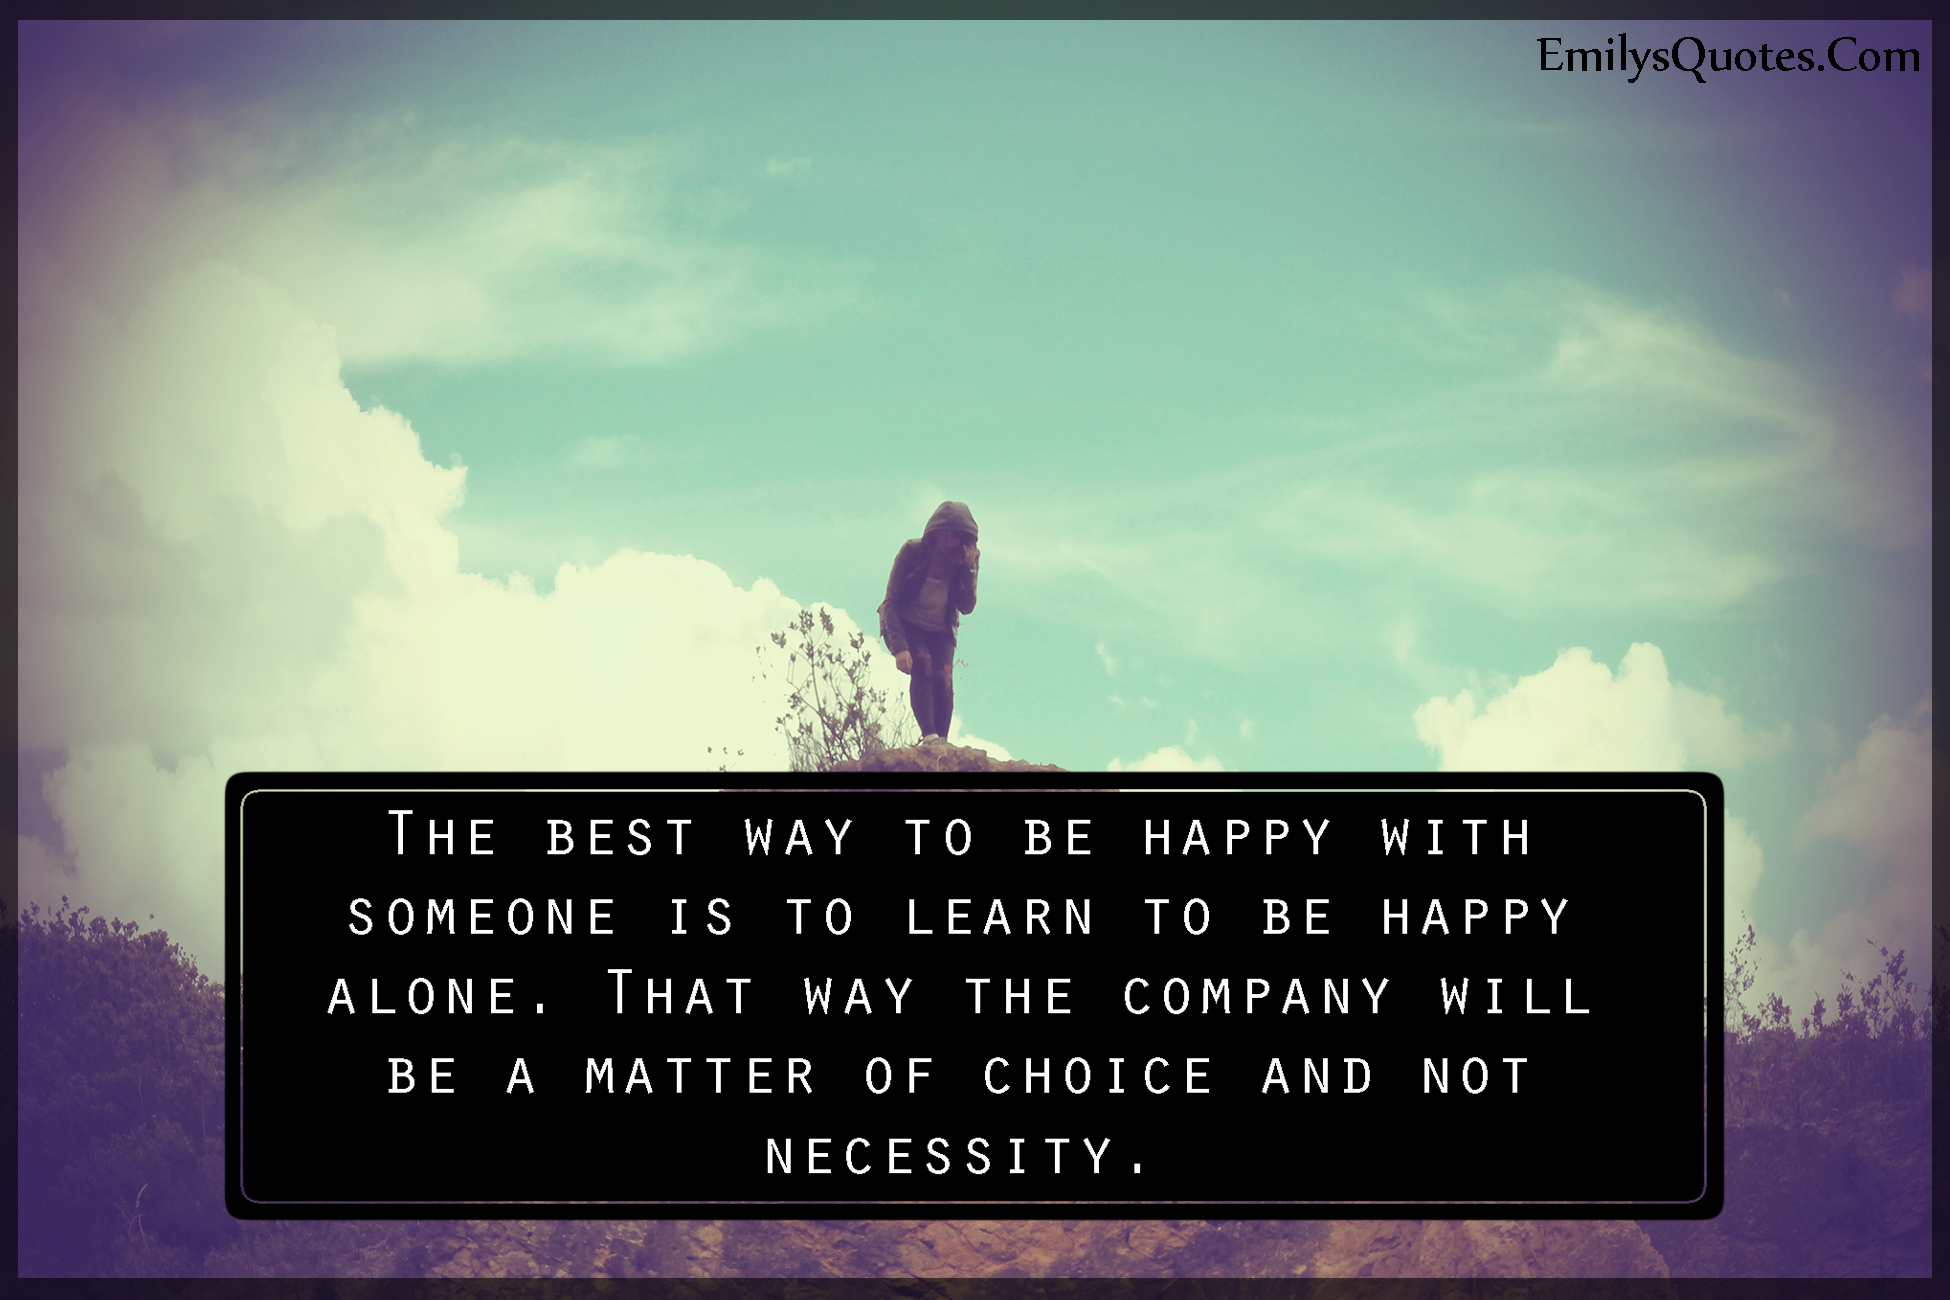 The best way to be happy with someone is to learn to be happy alone. That way the company will be a matter of choice and not necessity